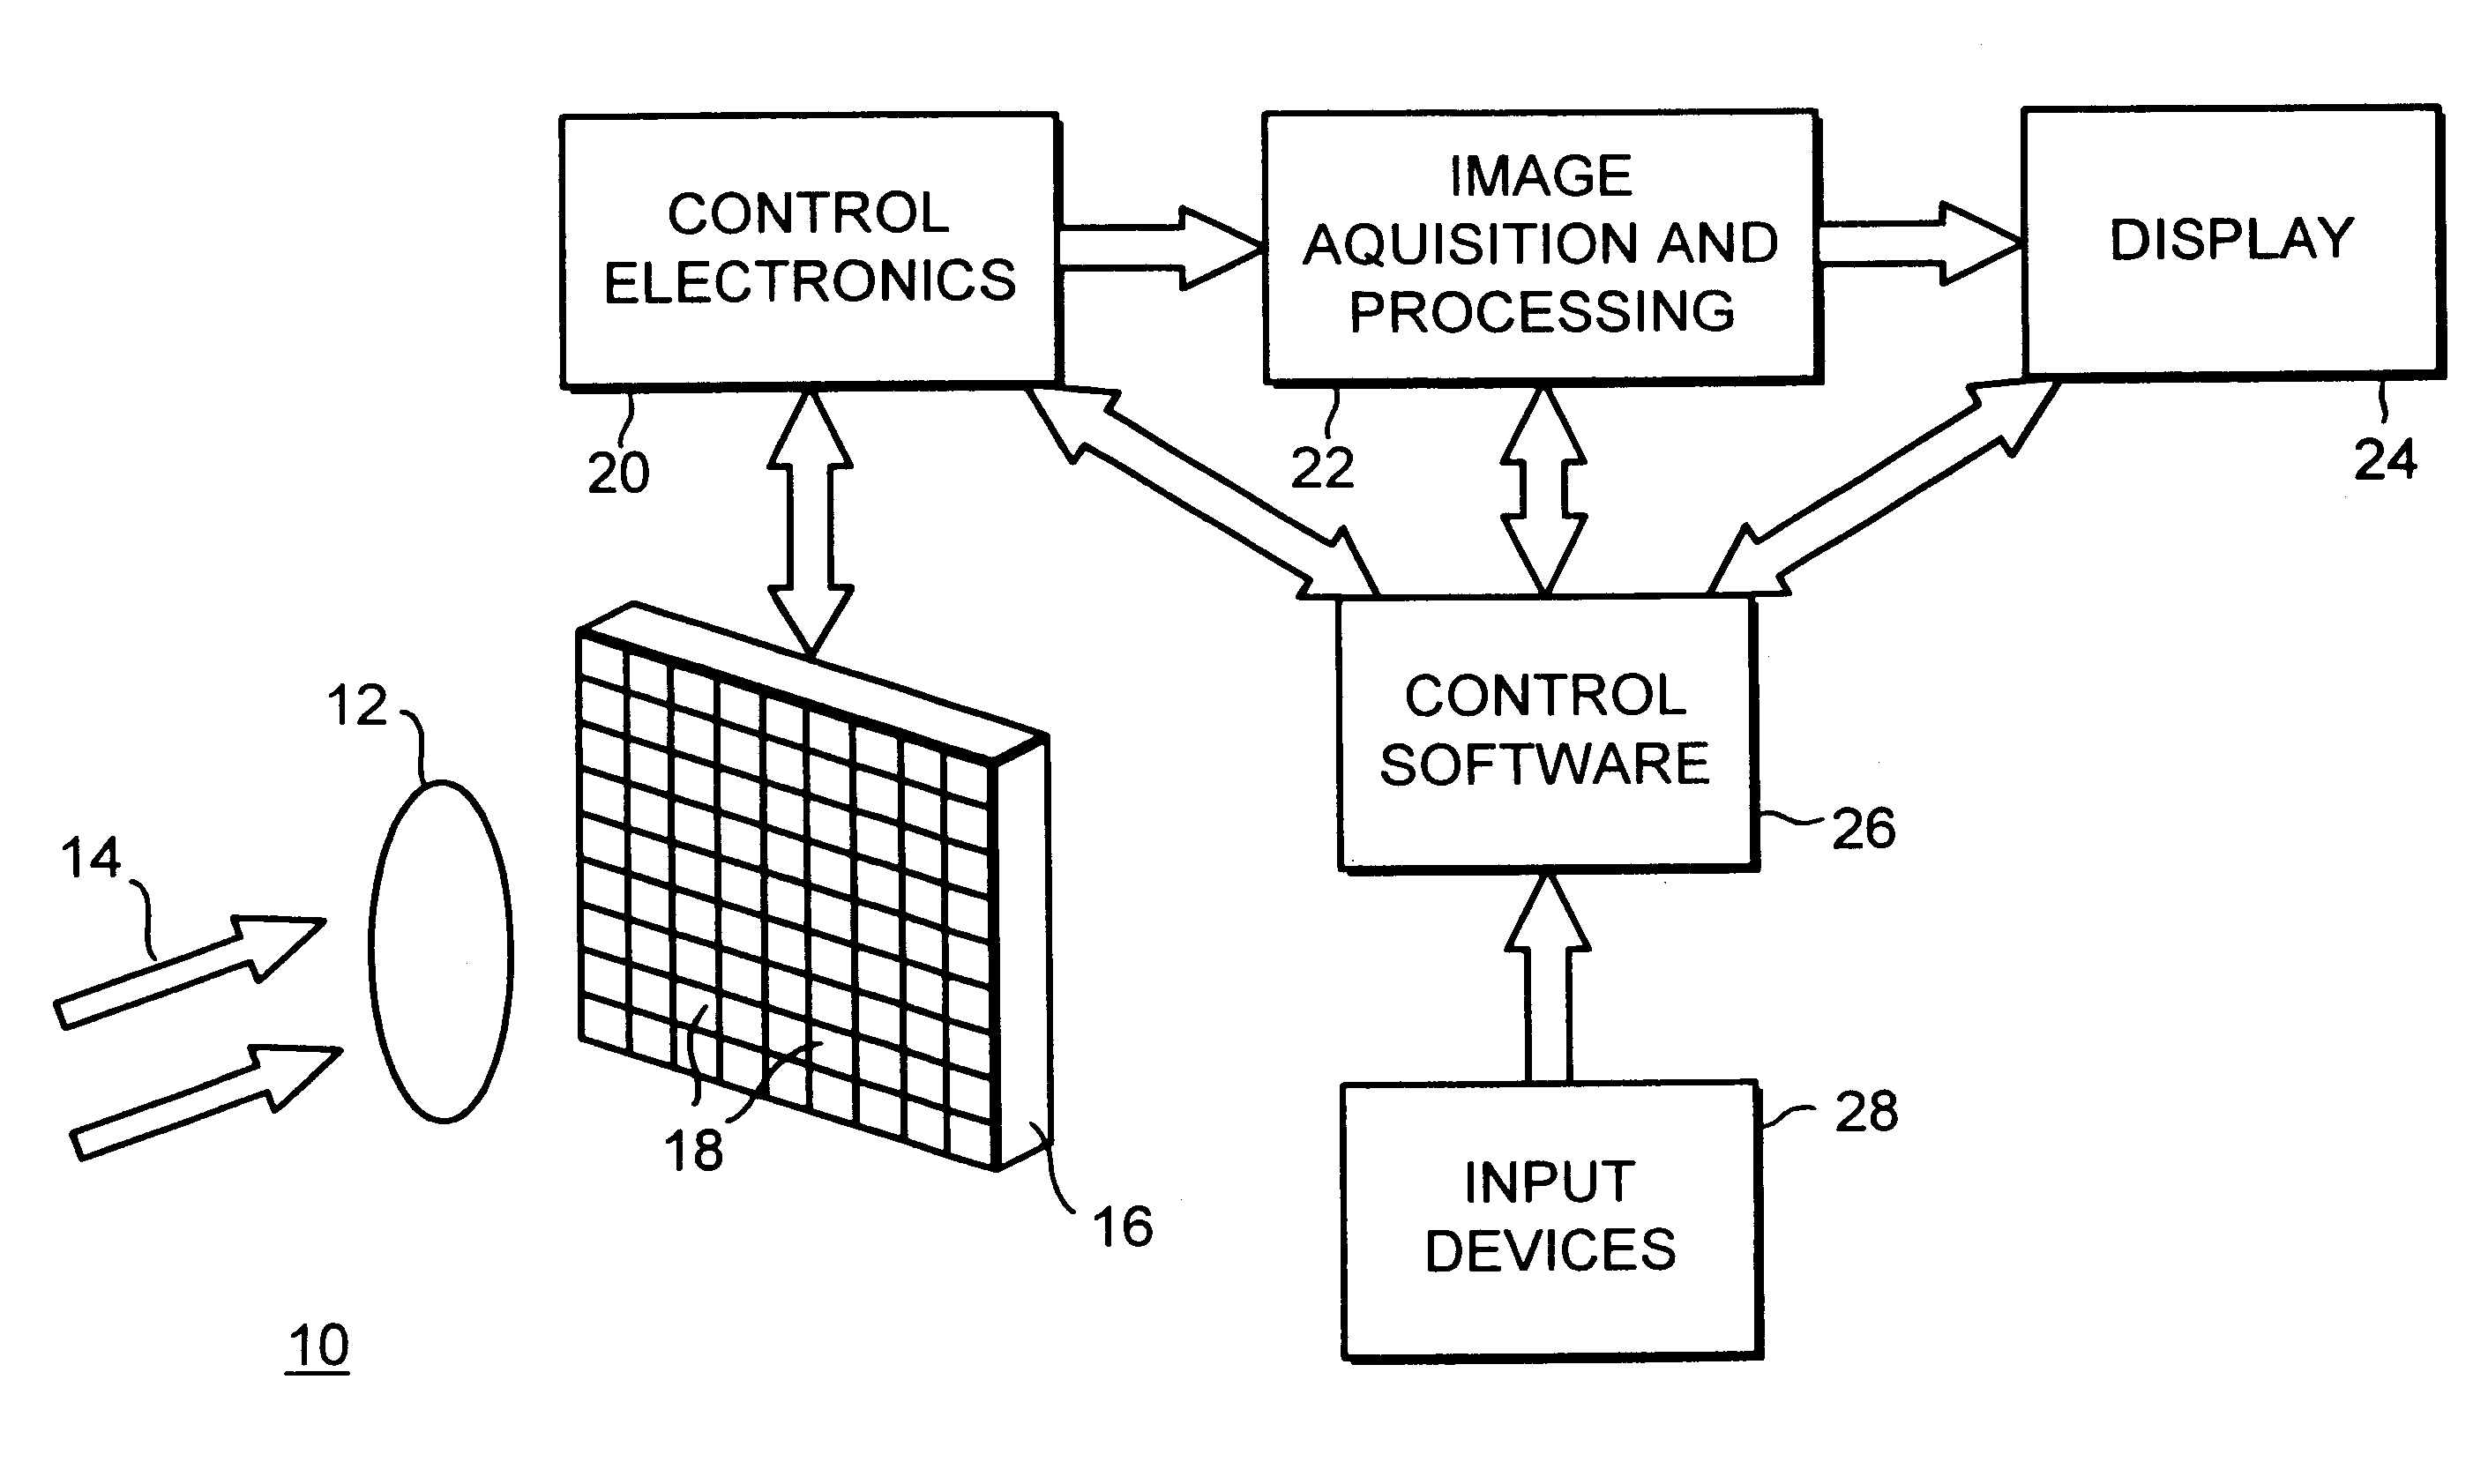 Apparatus for radiation imaging using an array of image cells